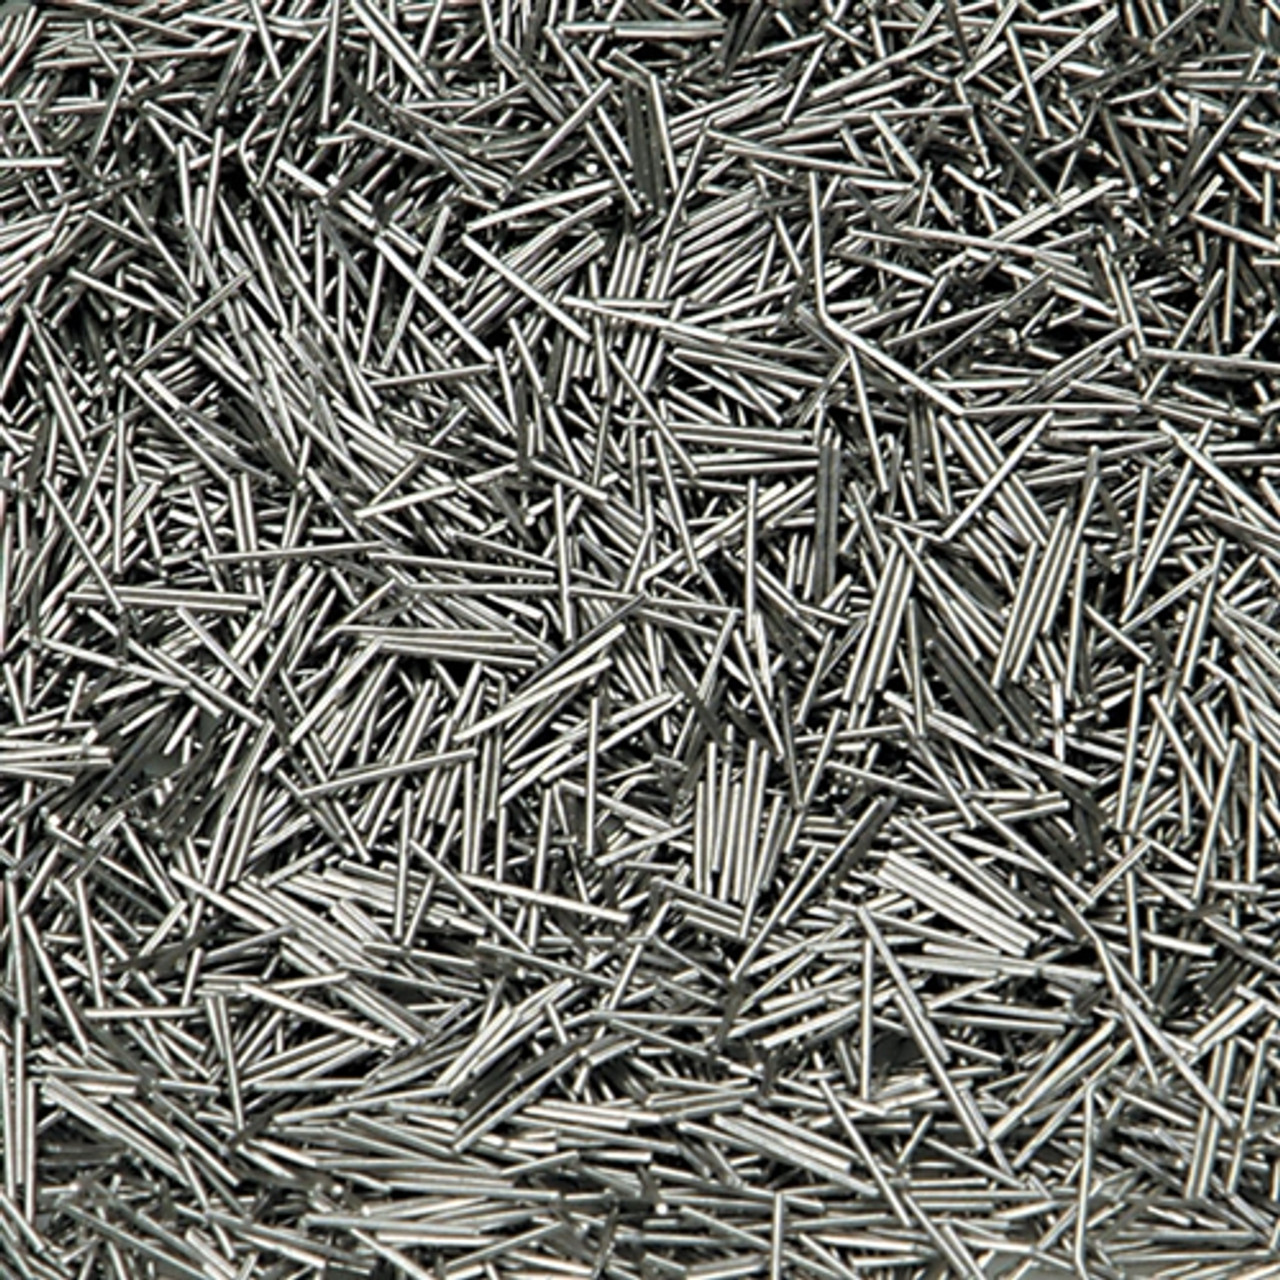 Stainless Steel 0.5mm Pins (2.2 lbs.) for Magnetic Tumbling